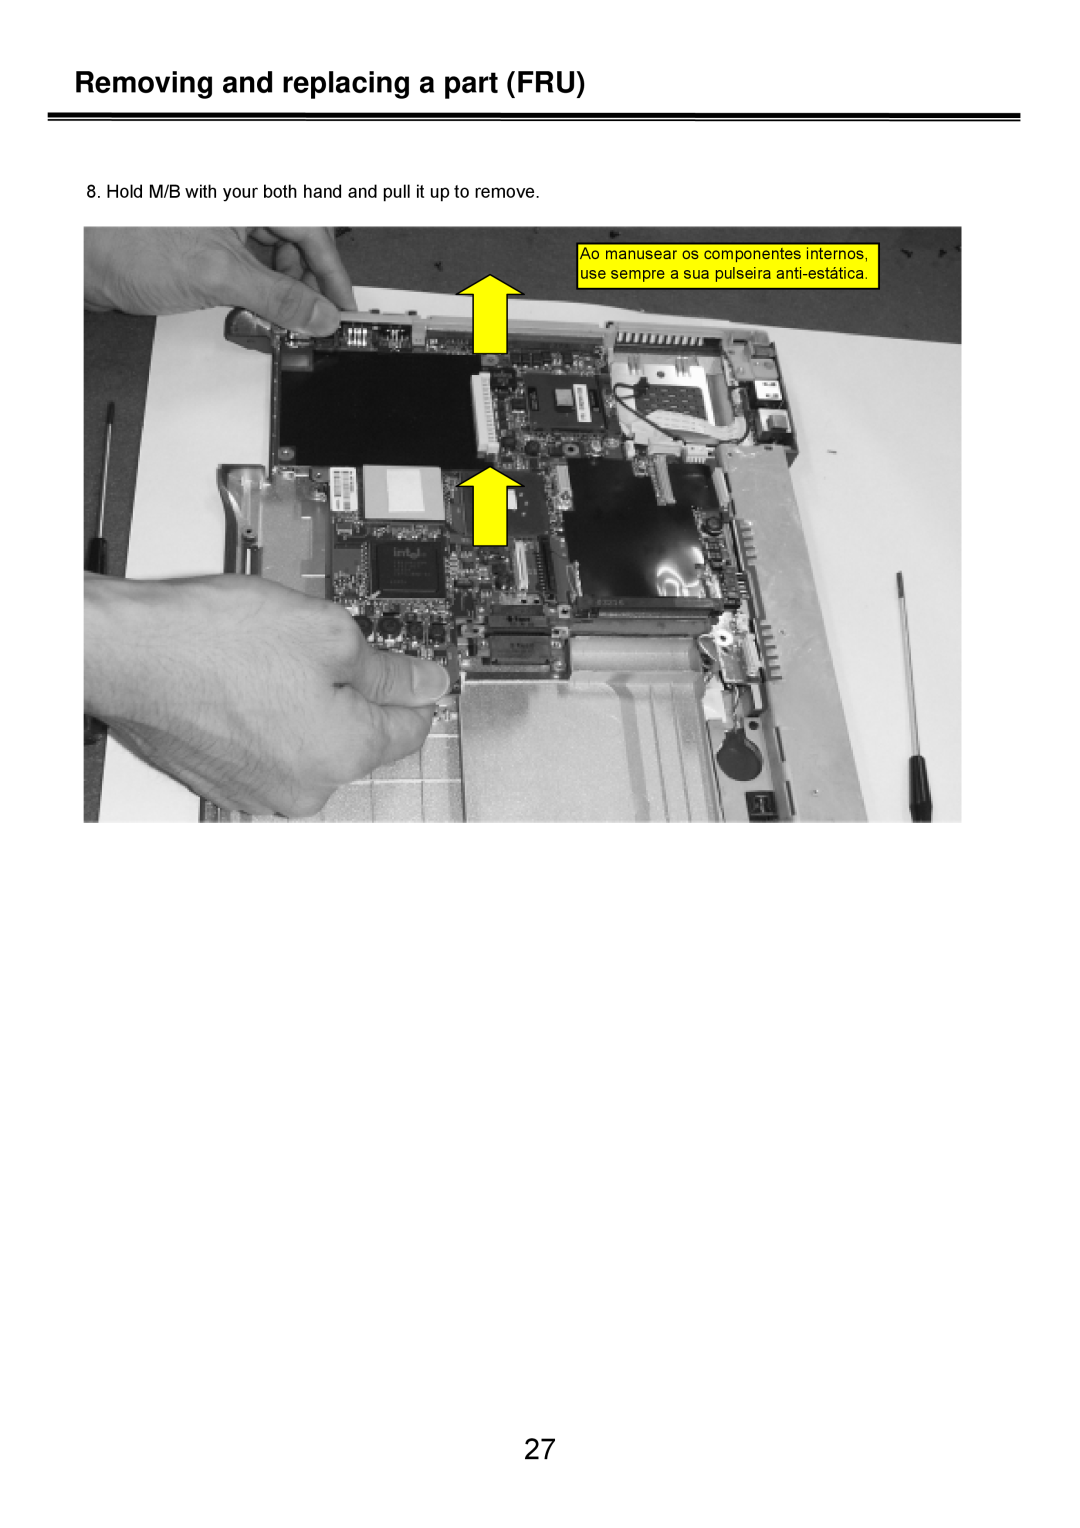 LG Electronics LS50 service manual Hold M/B with your both hand and pull it up to remove, Removing and replacing a part FRU 